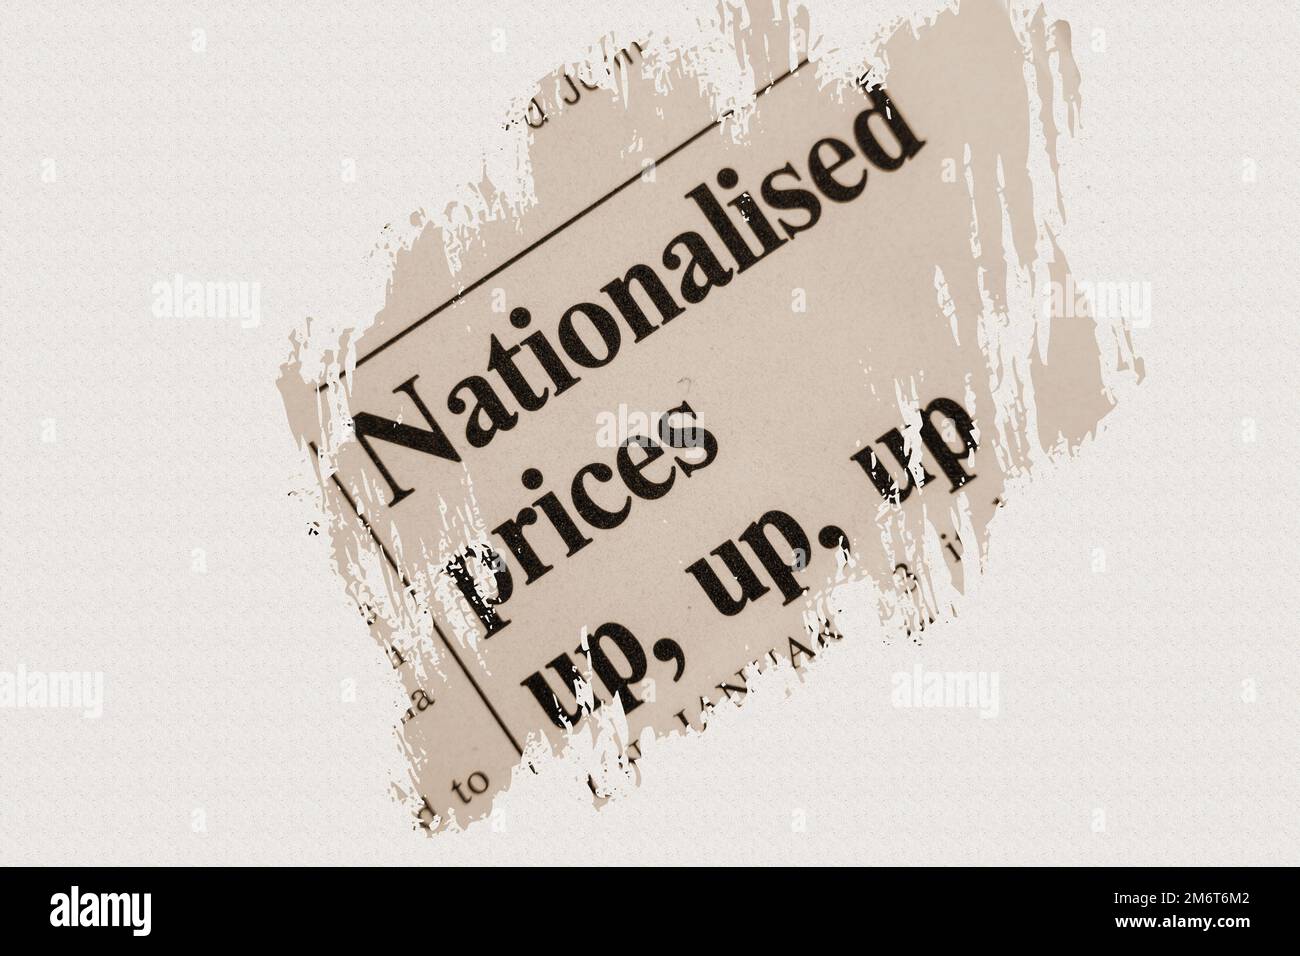 news story from 1975 newspaper headline article title - Nationalised prices up, up, up in sepia Stock Photo